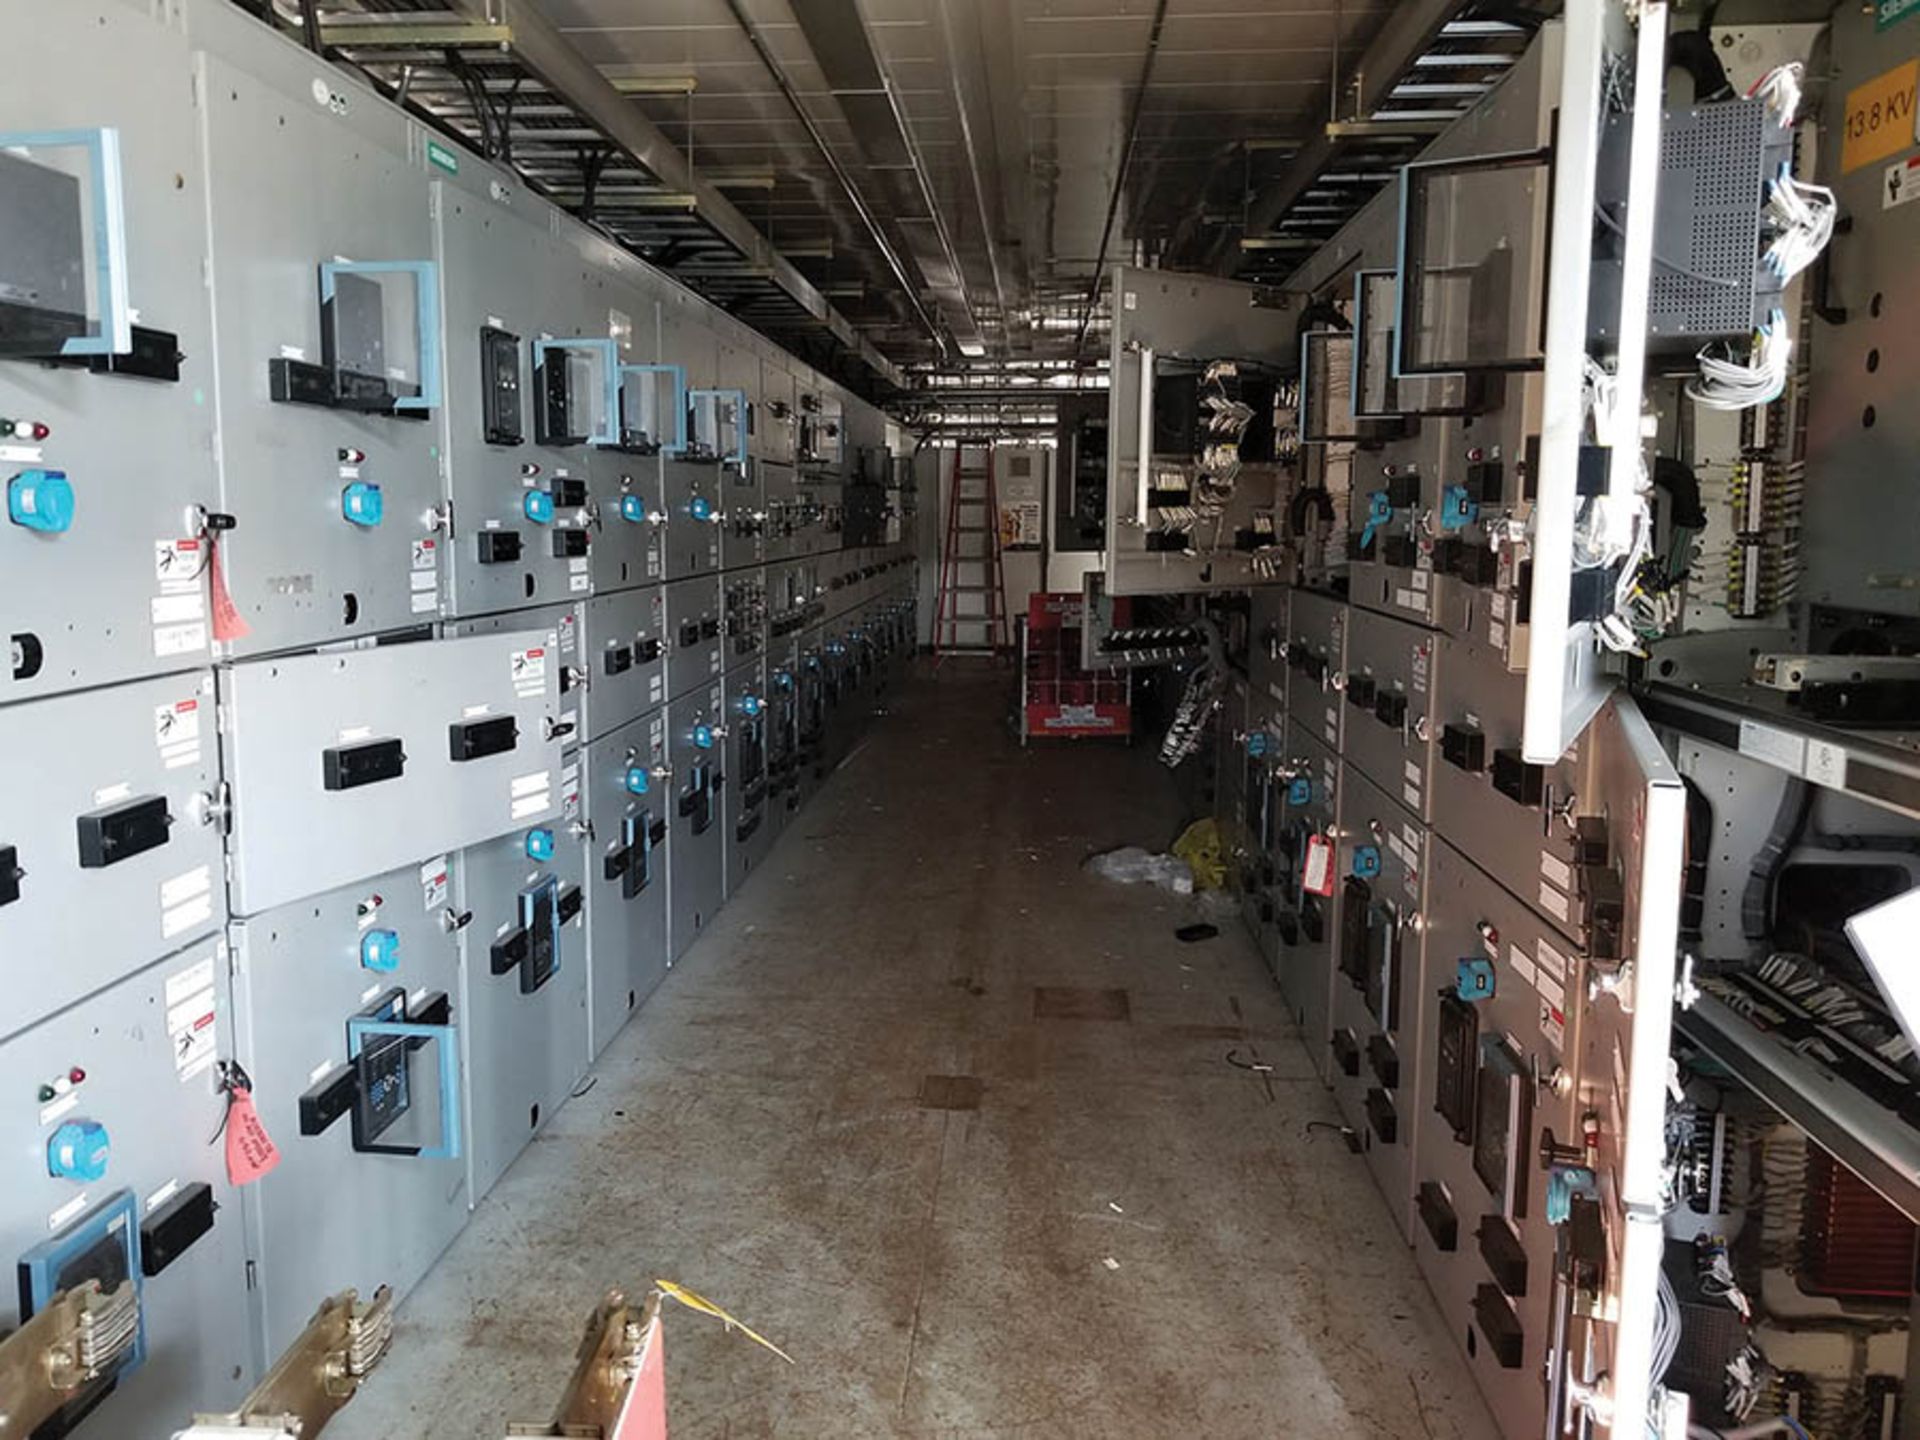 PDC-1 CONTENTS / (20+) COLUMNS OF SIEMENS SWITCHGEAR WITH VACUUM BREAKERS IN MOST BUCKETS, GE